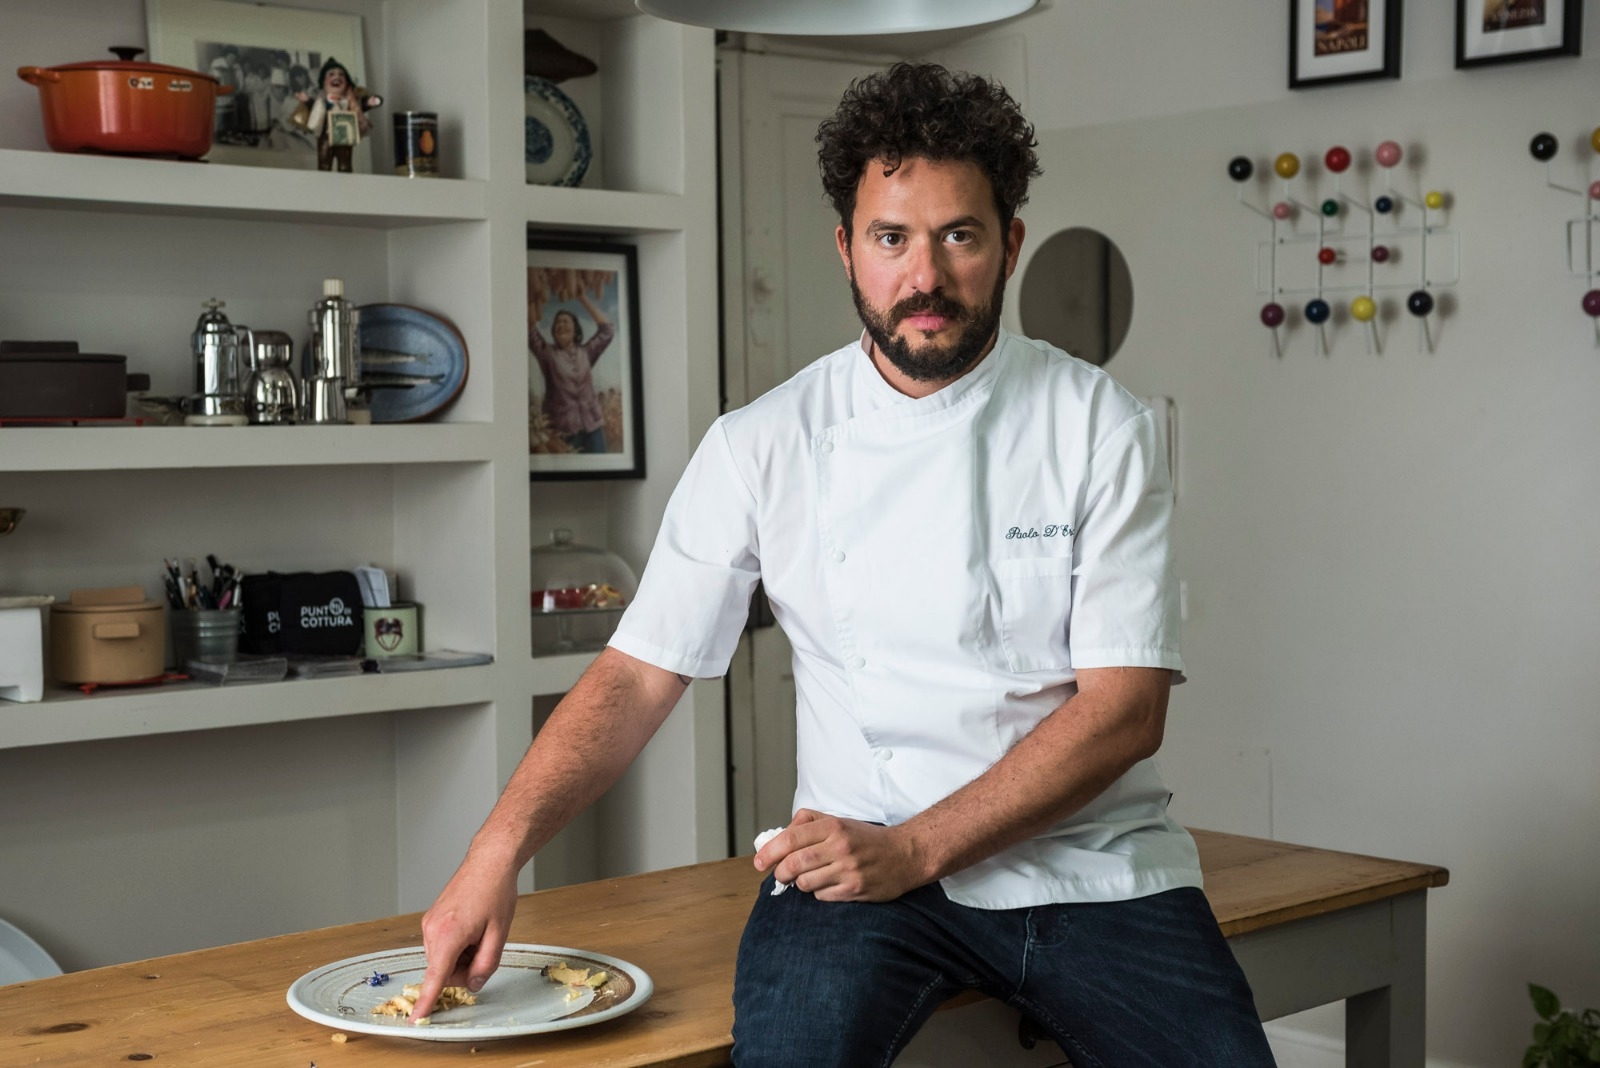 Italian-Japanese fusion cuisine: the point of view of Paolo D’ercole and his cuisine